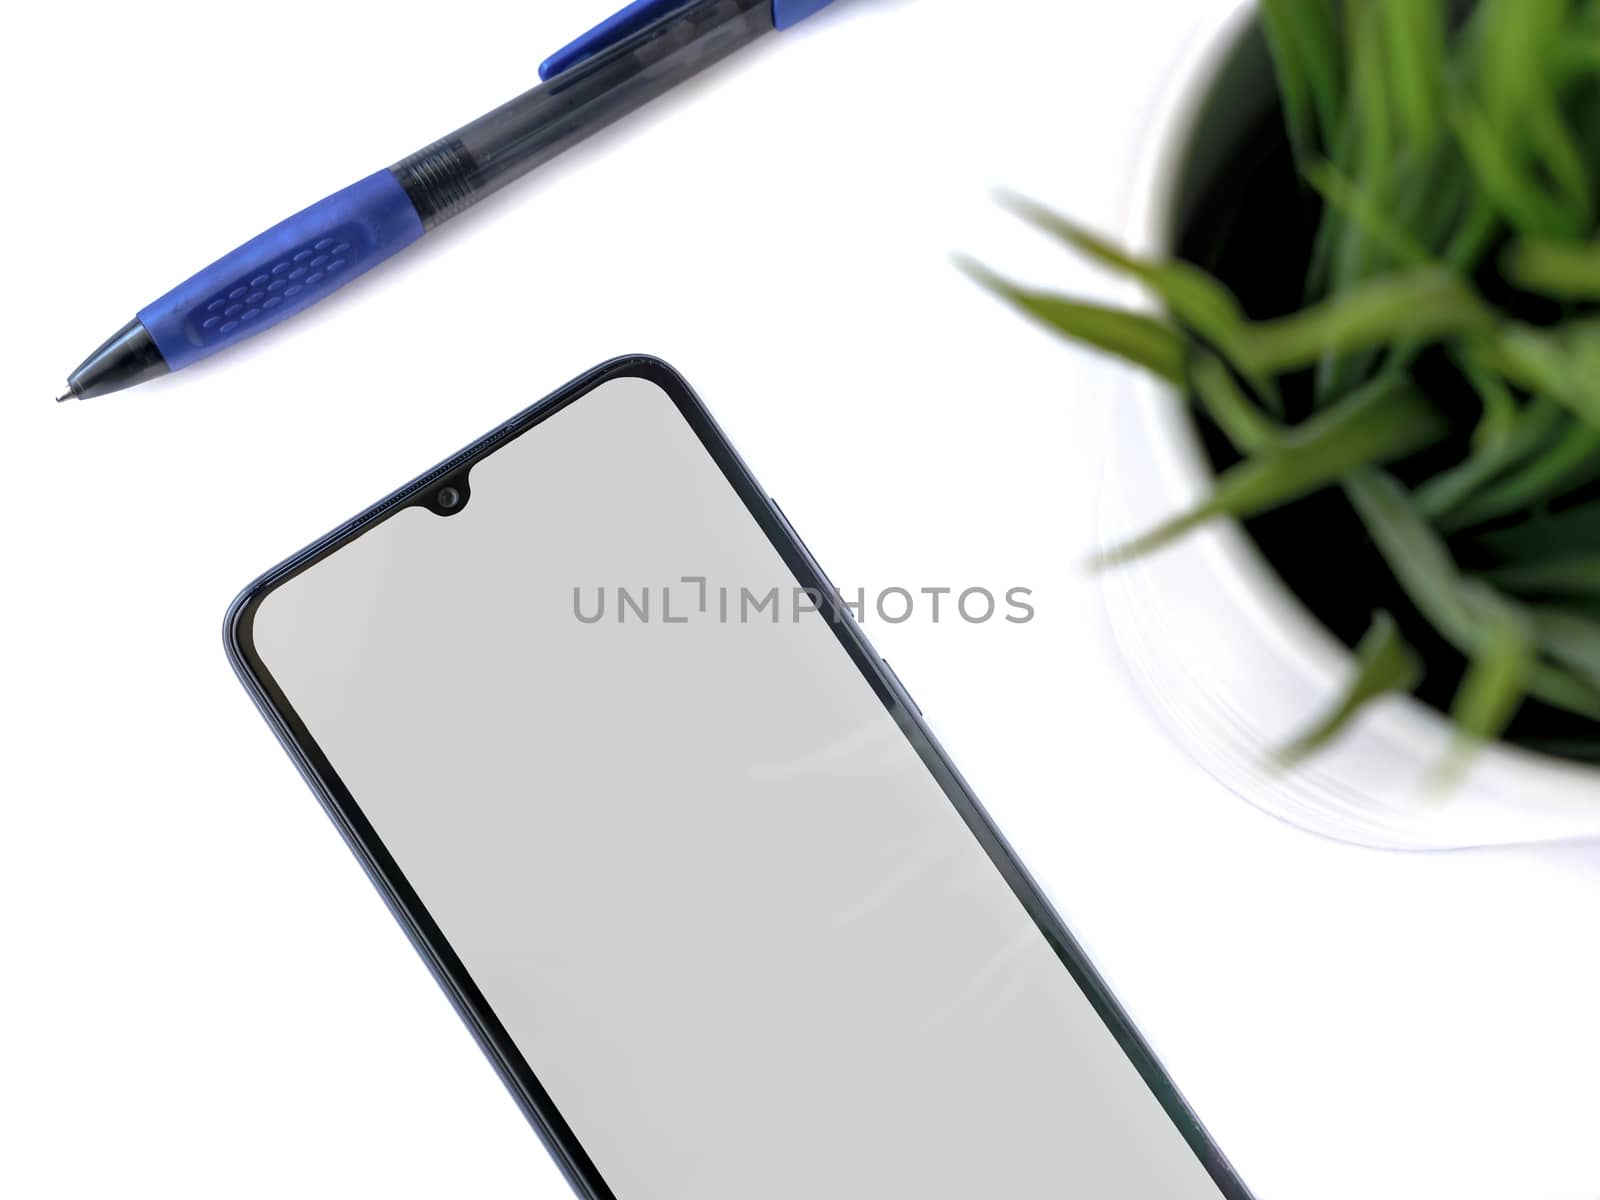 Modern minimalist workspace with black mobile smartphone mockup lies on the surface with a blank screen. Office desk table with a green plant and a pen. Top view flat lay closeup on white background.